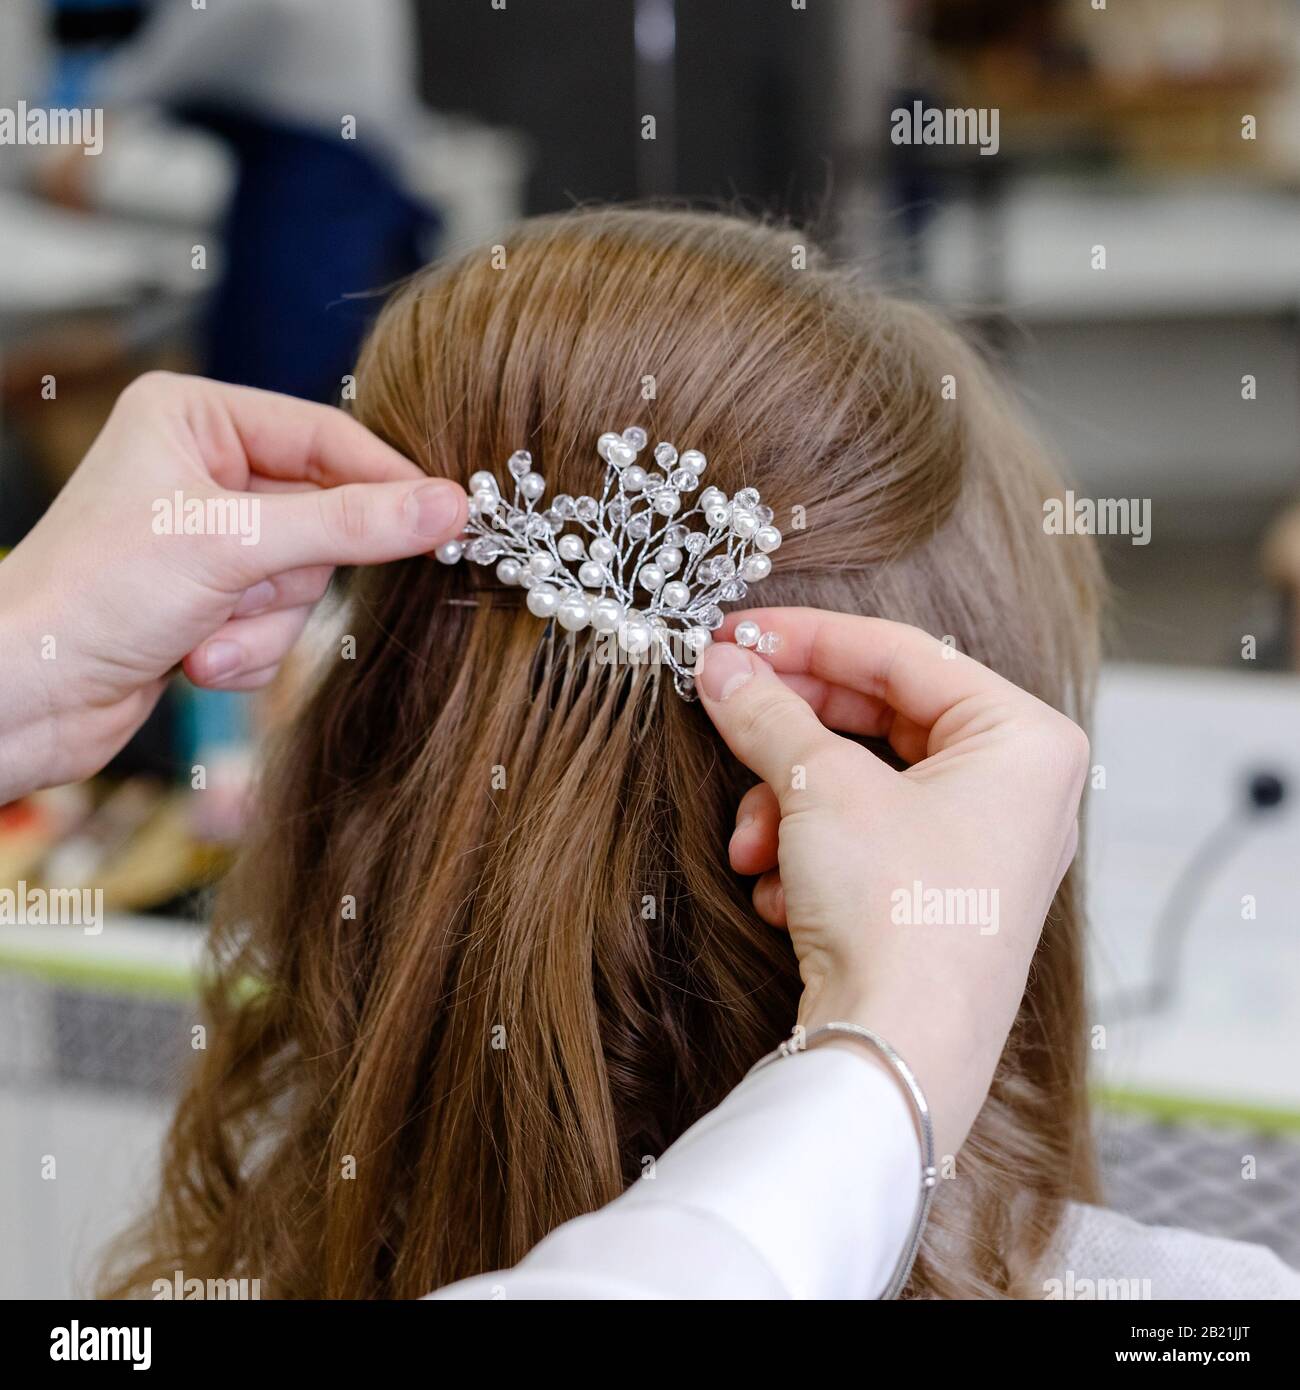 Nail Your Next Party With This Hair Pin Hairstyle  Luluscom Fashion Blog